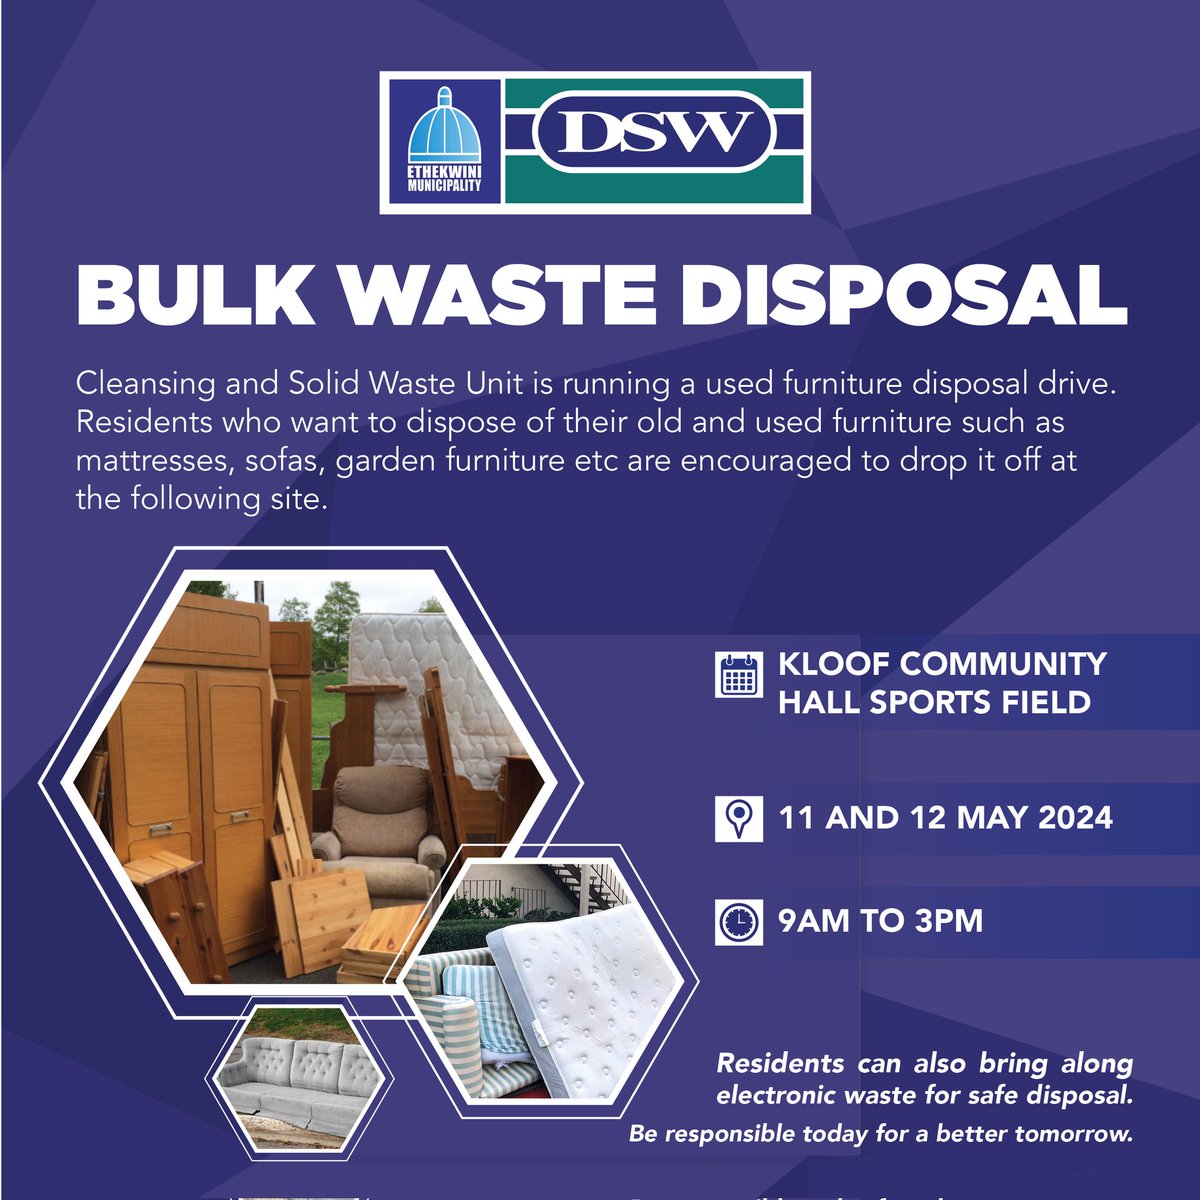 The Cleansing and Solid Waste Unit invites residents to drop off their old and used furniture. The details are listed below: